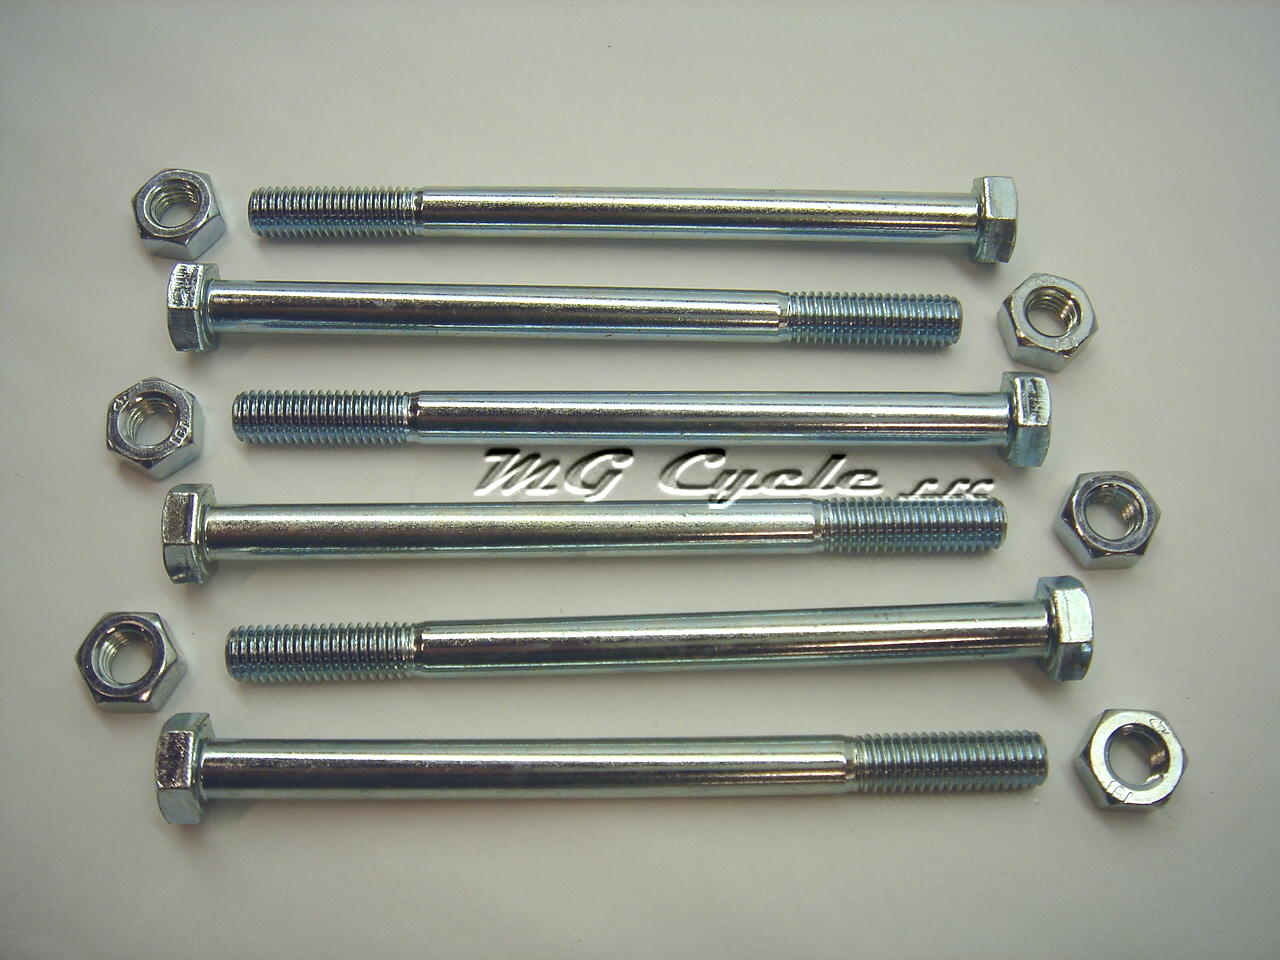 dual disk brake bolt kit, T3, Convert, G5 and 850T conversions